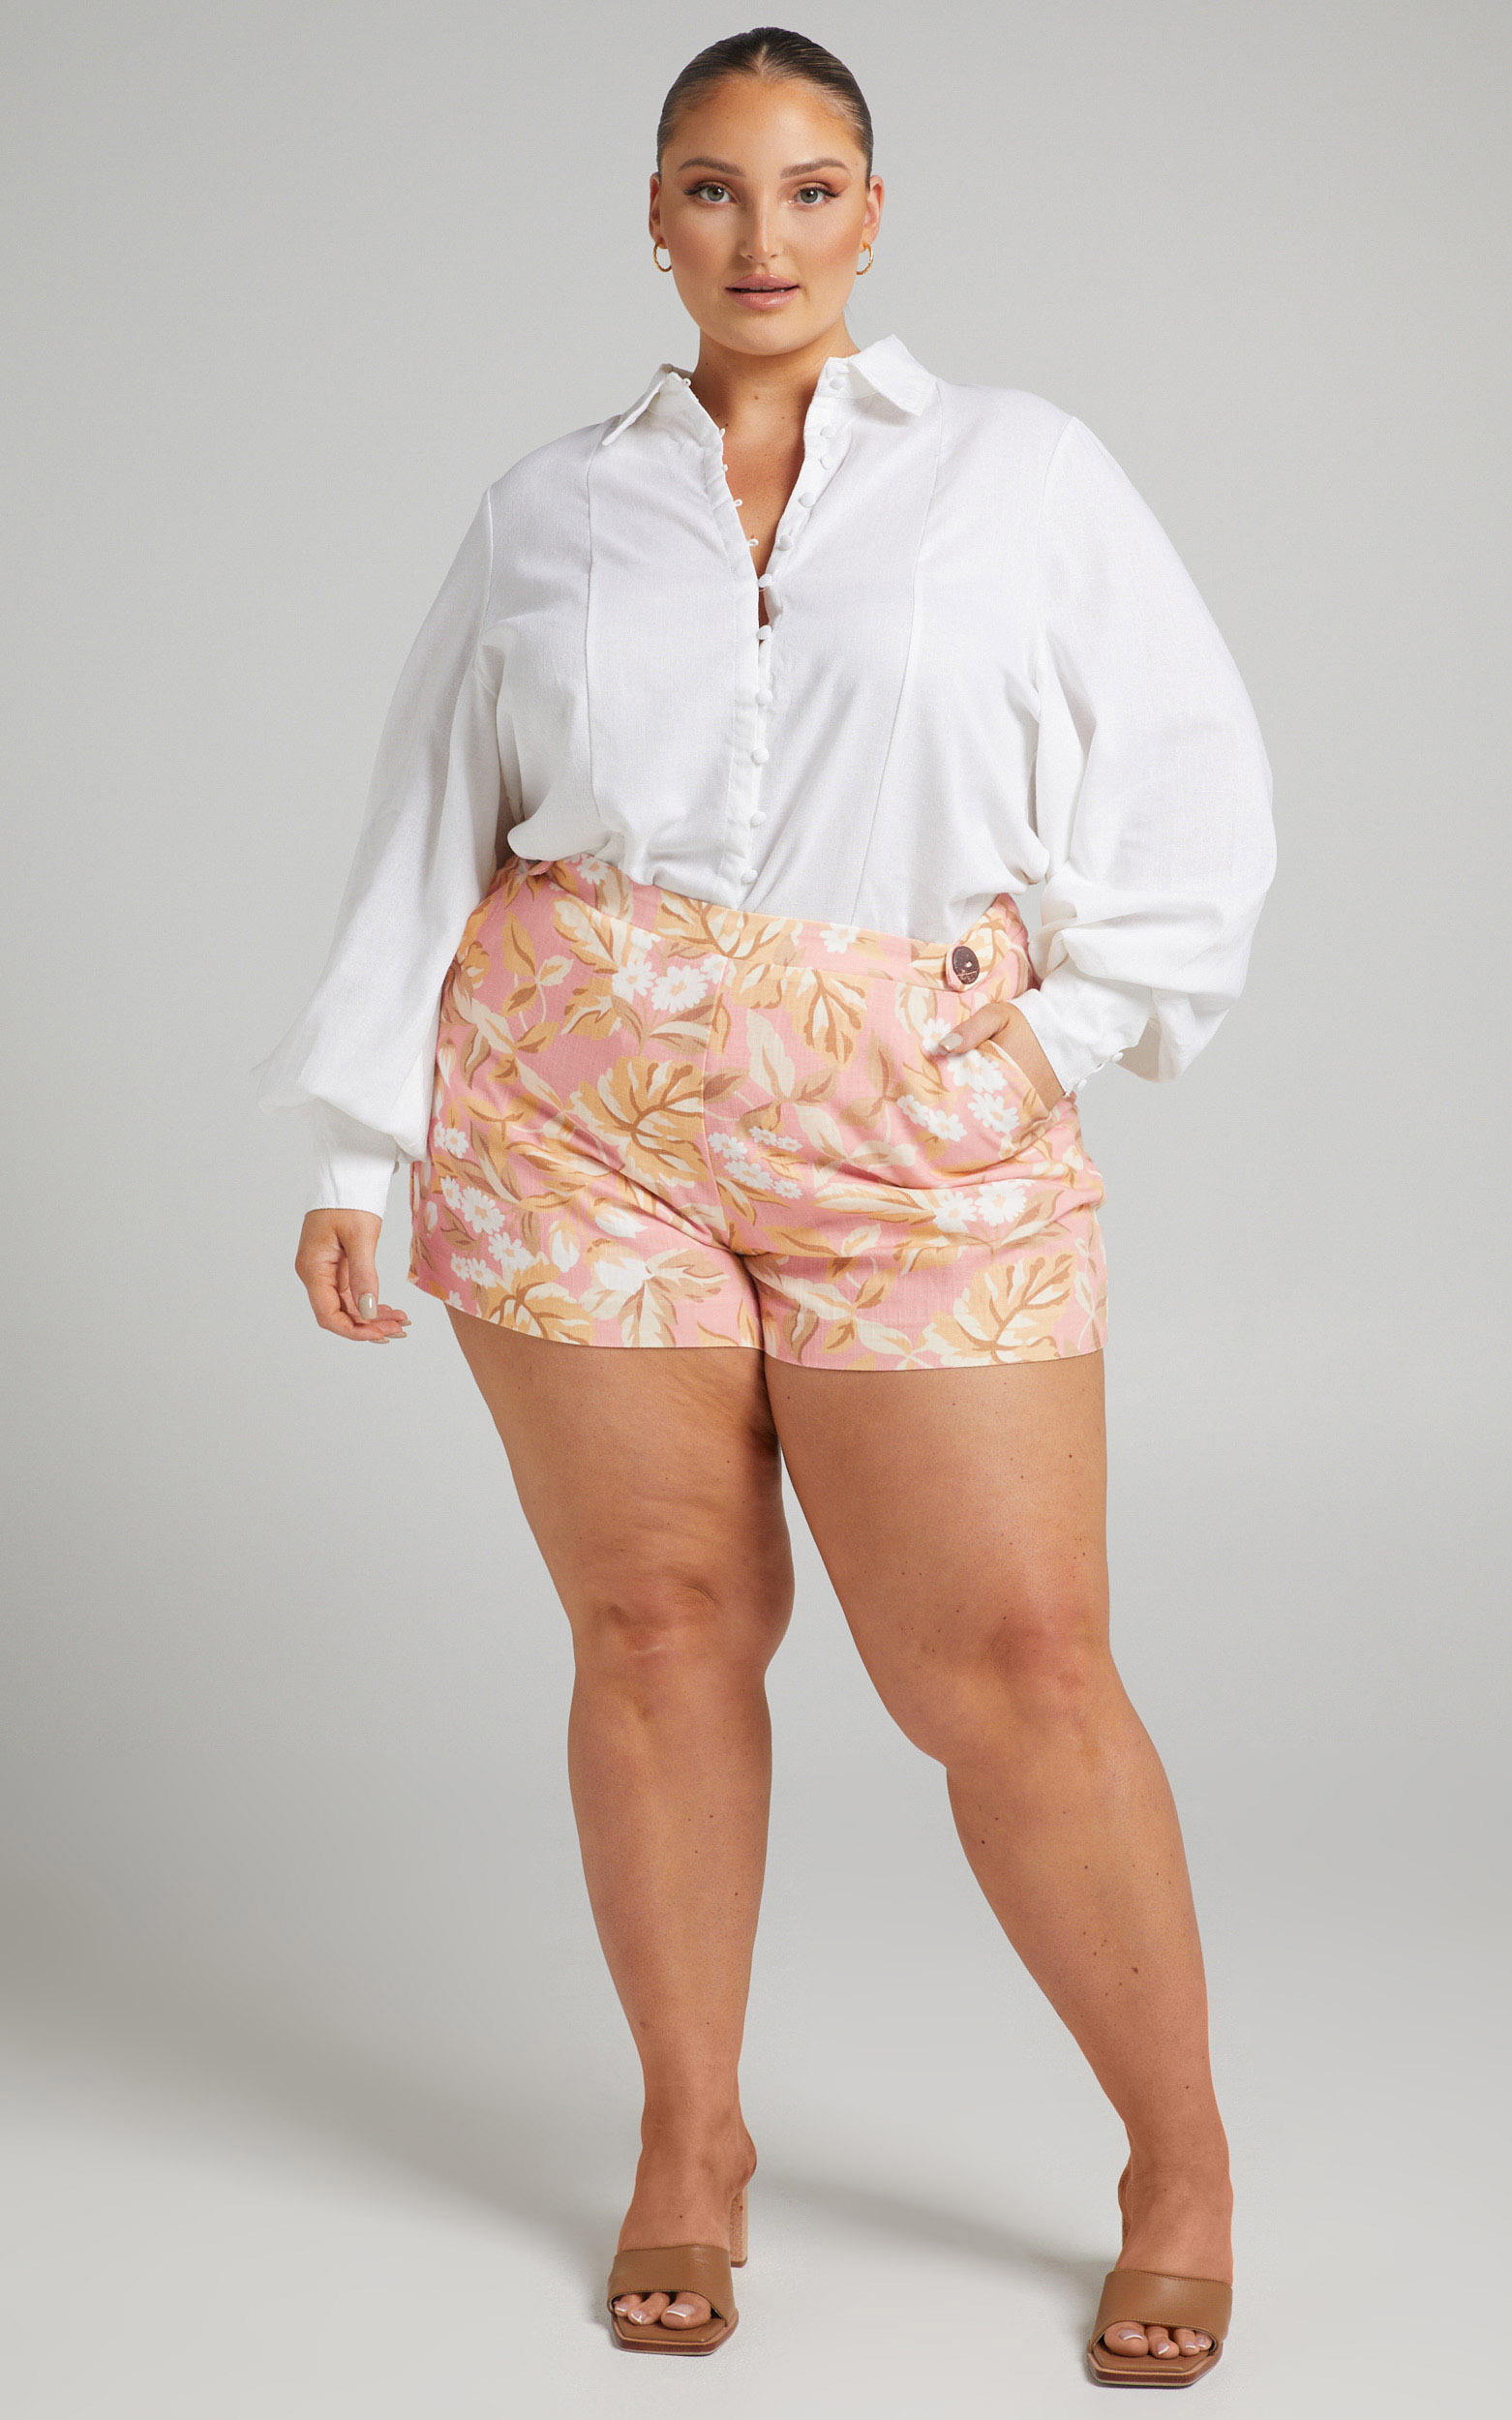 Amalie The Label - Abilene Button Waist Tailored Shorts in Pink Floral - 04, PNK1, hi-res image number null